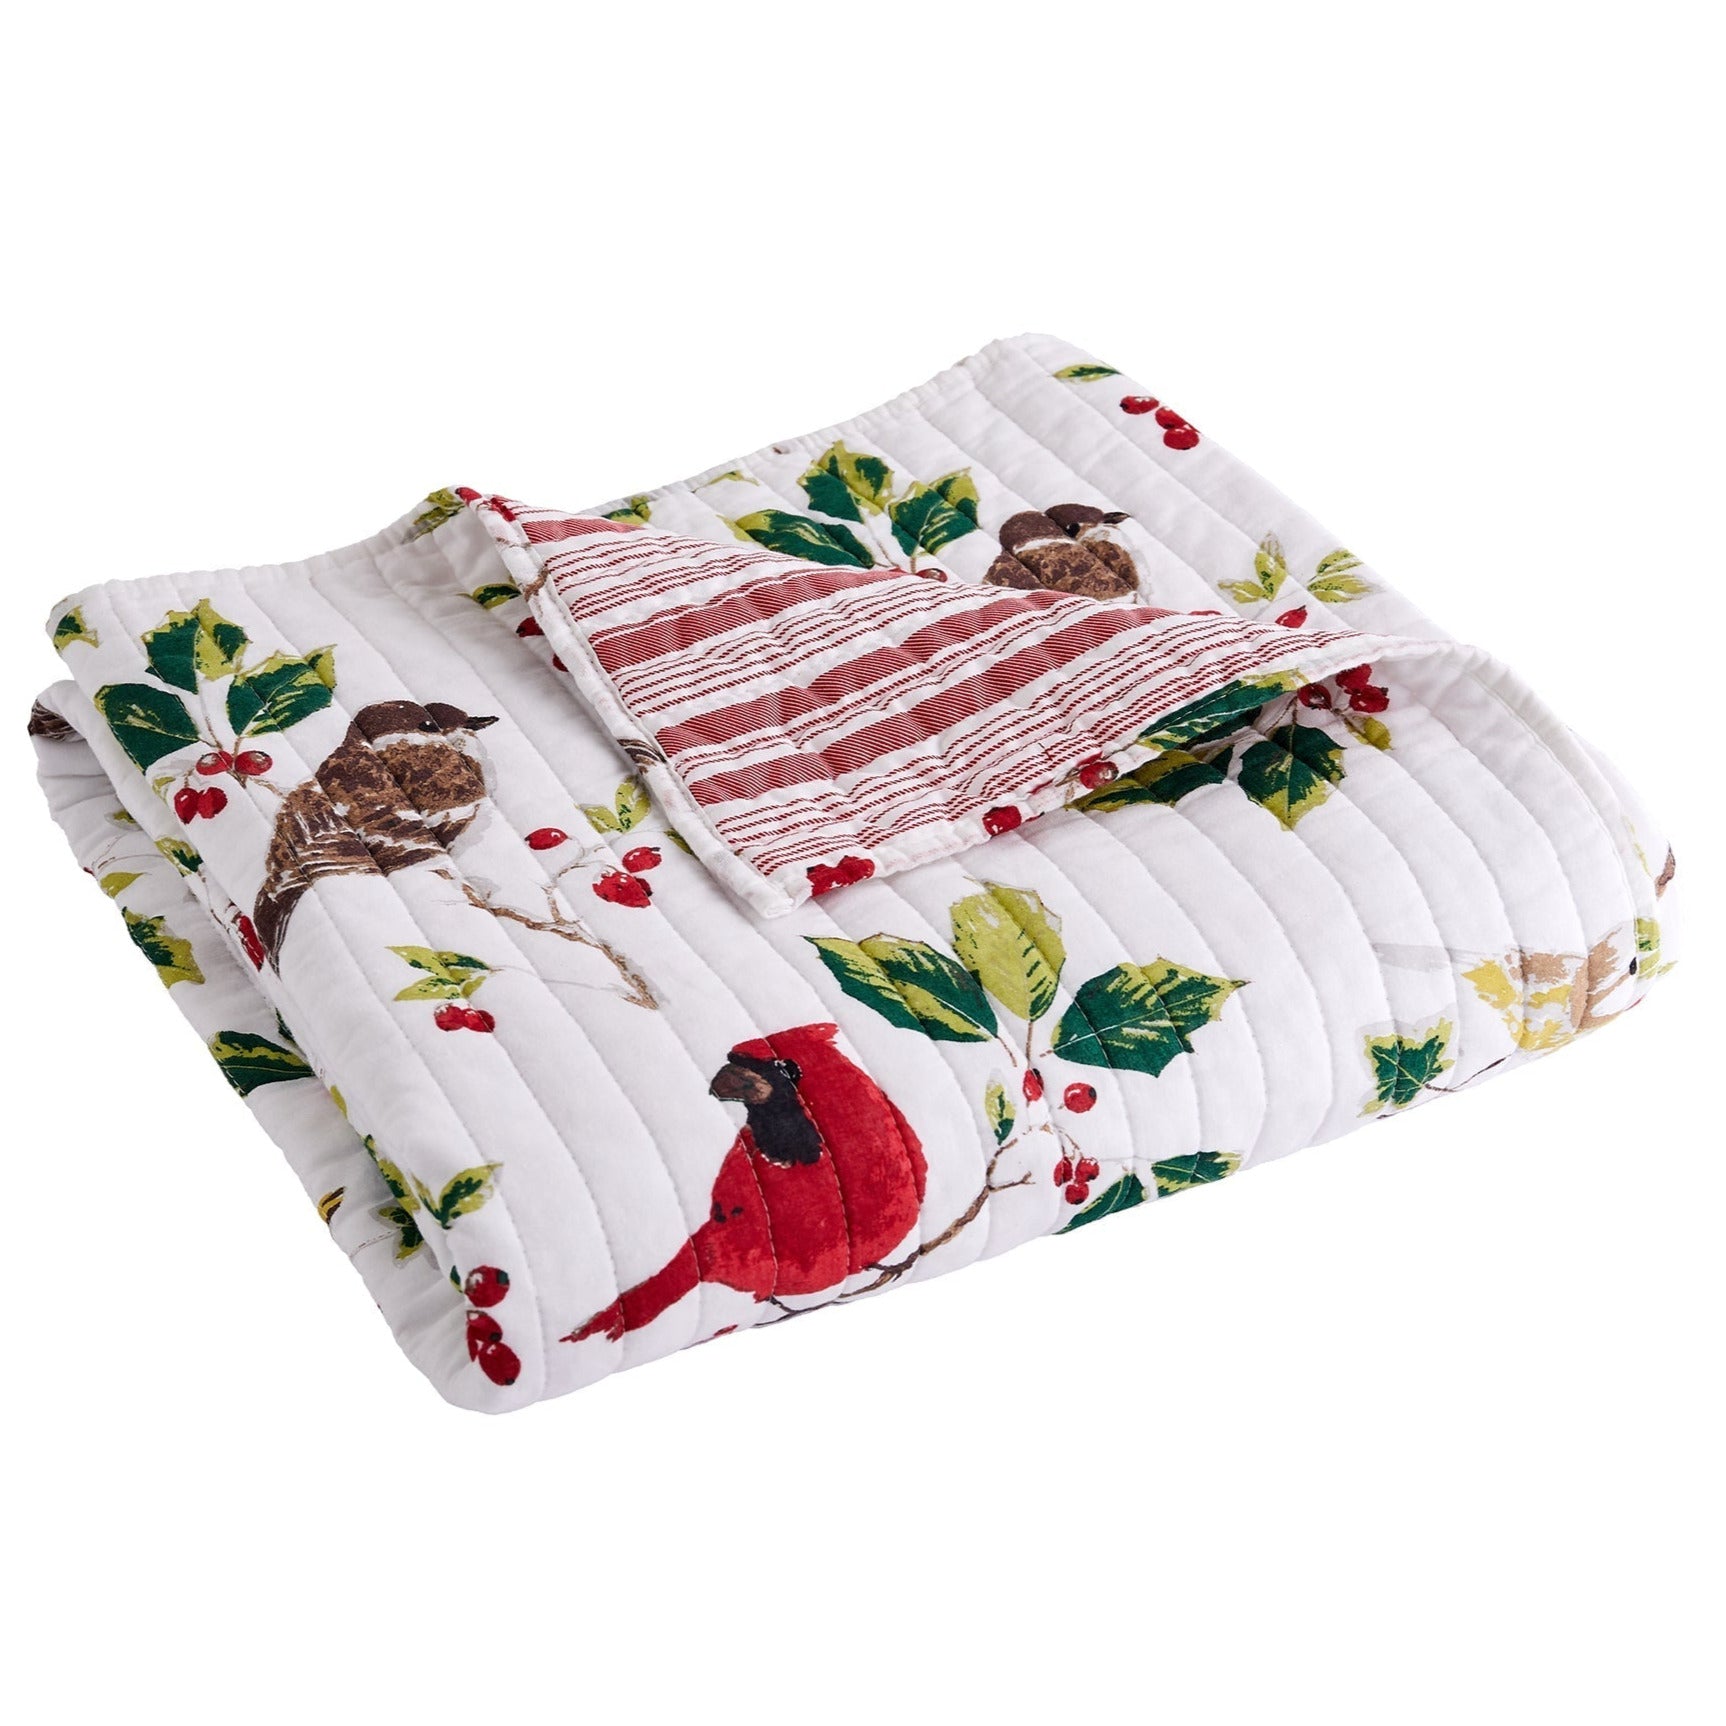 Joybirds Quilted Throw